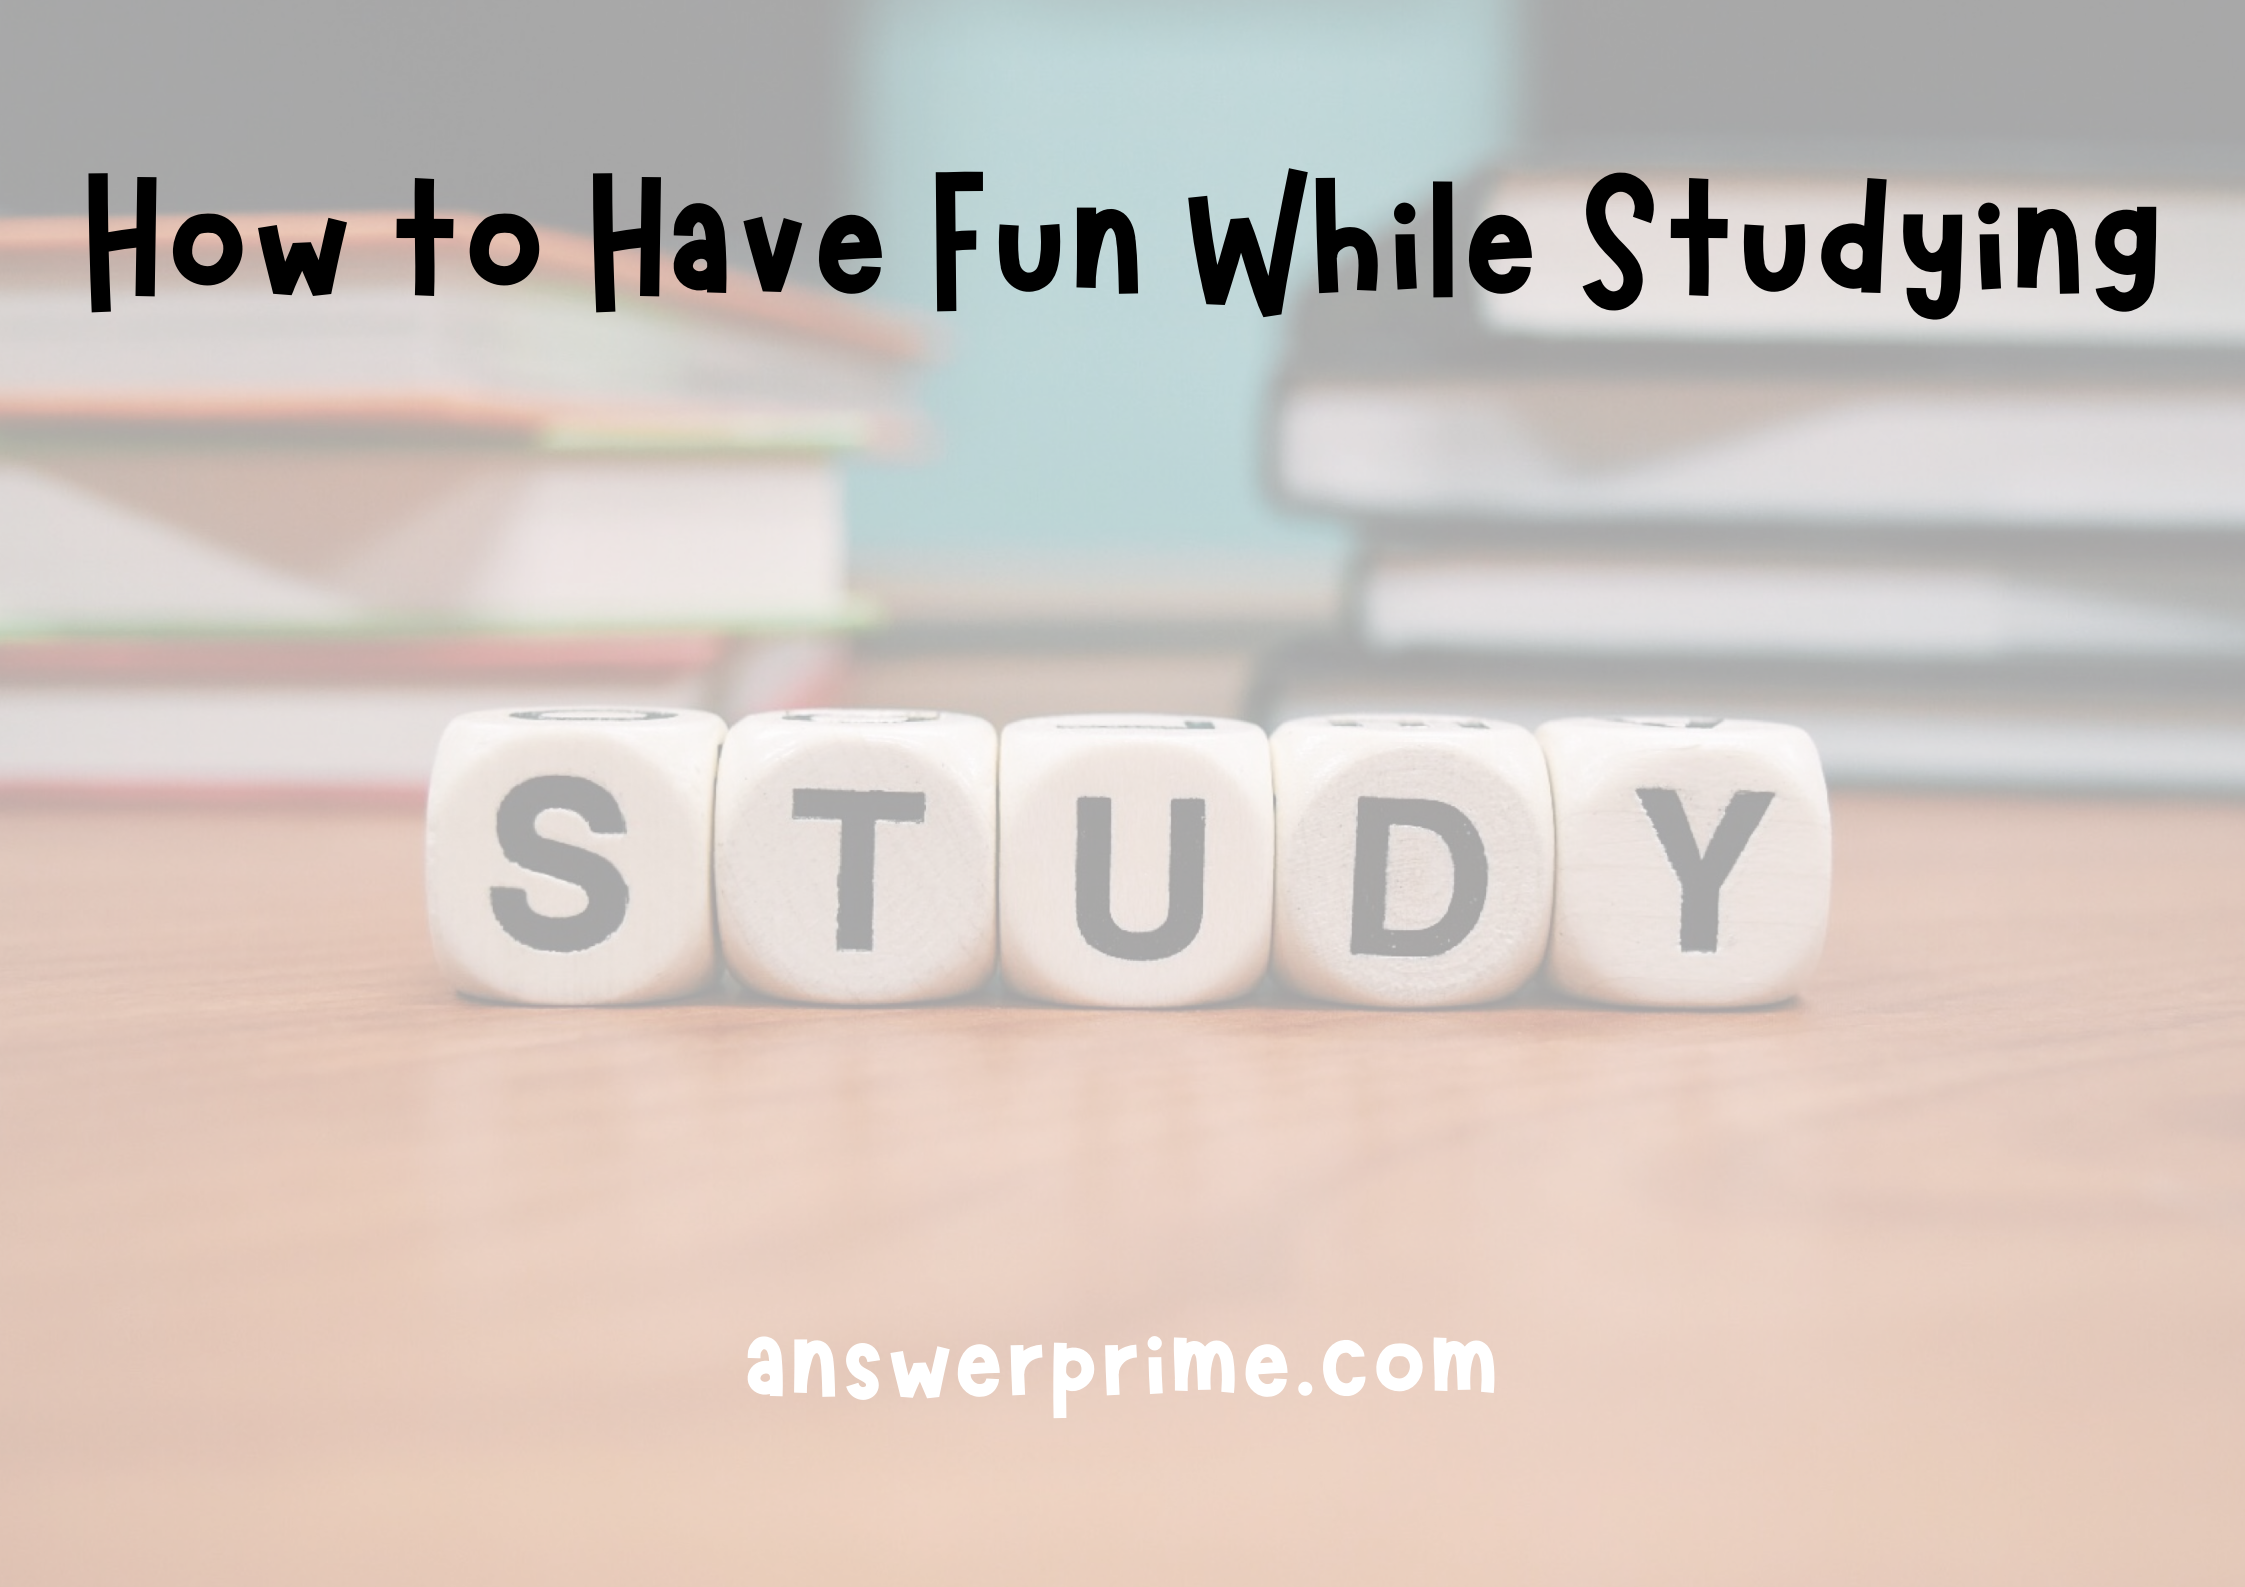 How to Have Fun While Studying